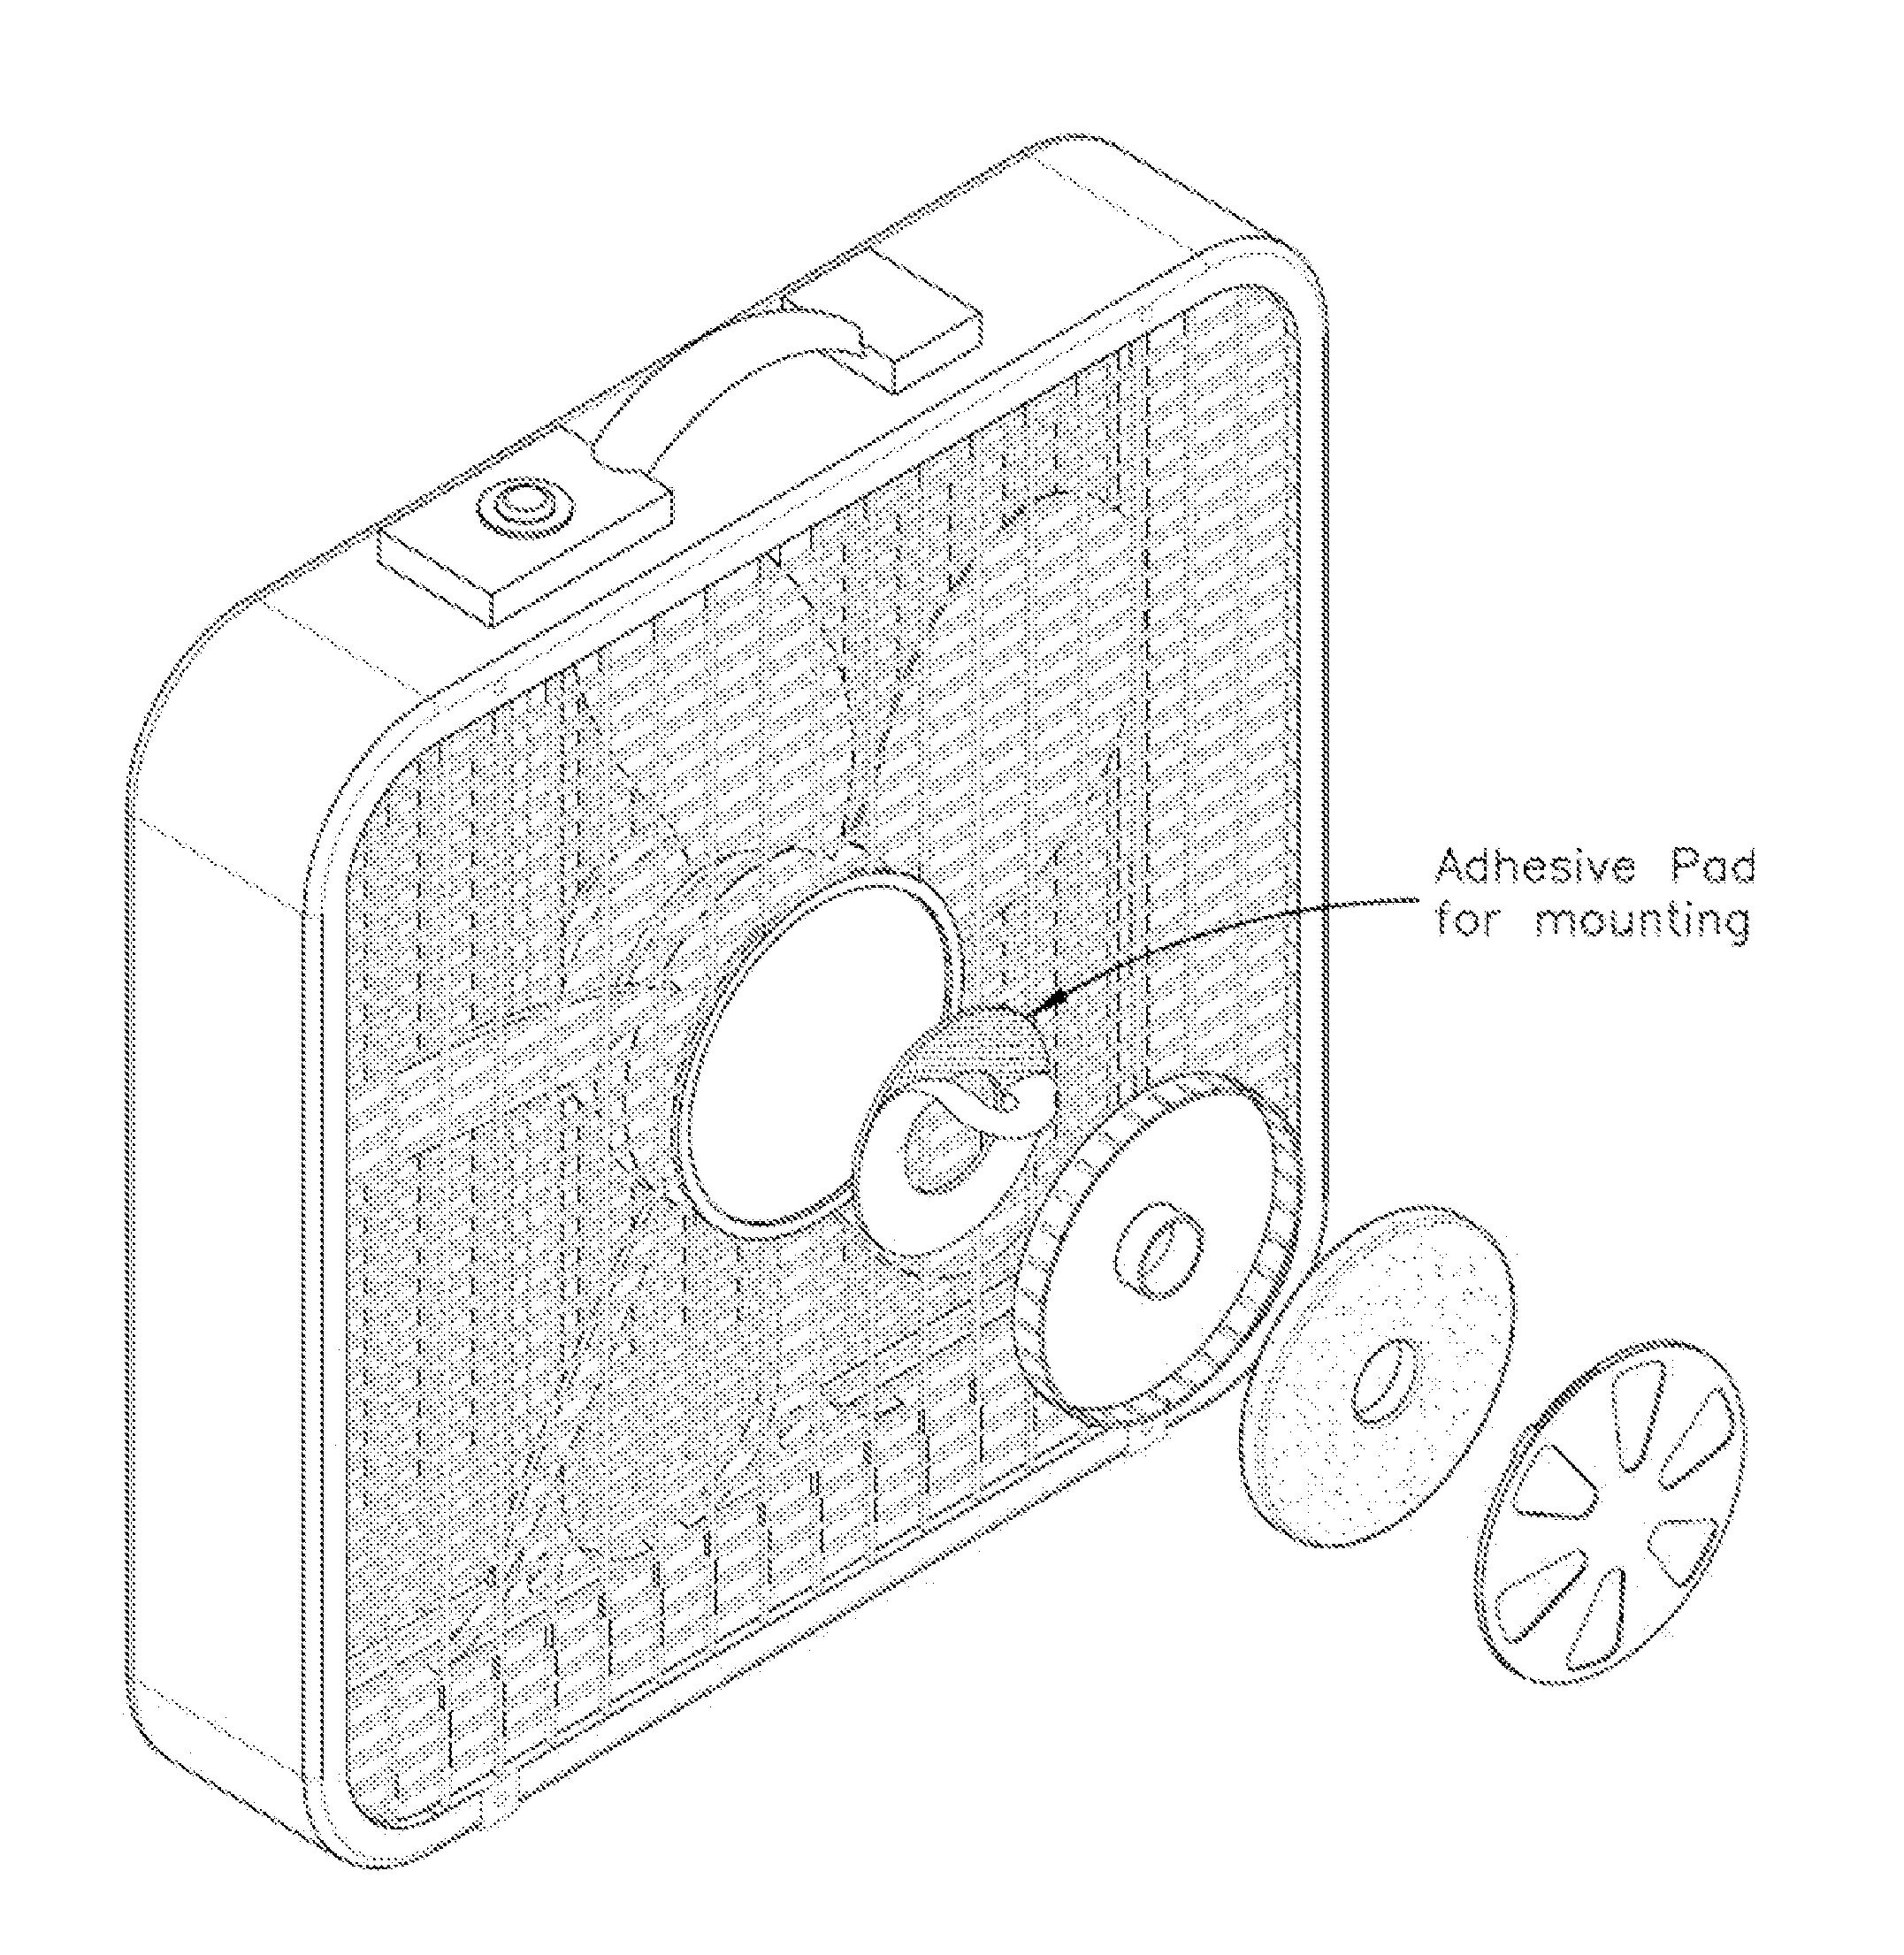 Apparatus for distributing a fragrance using a fan